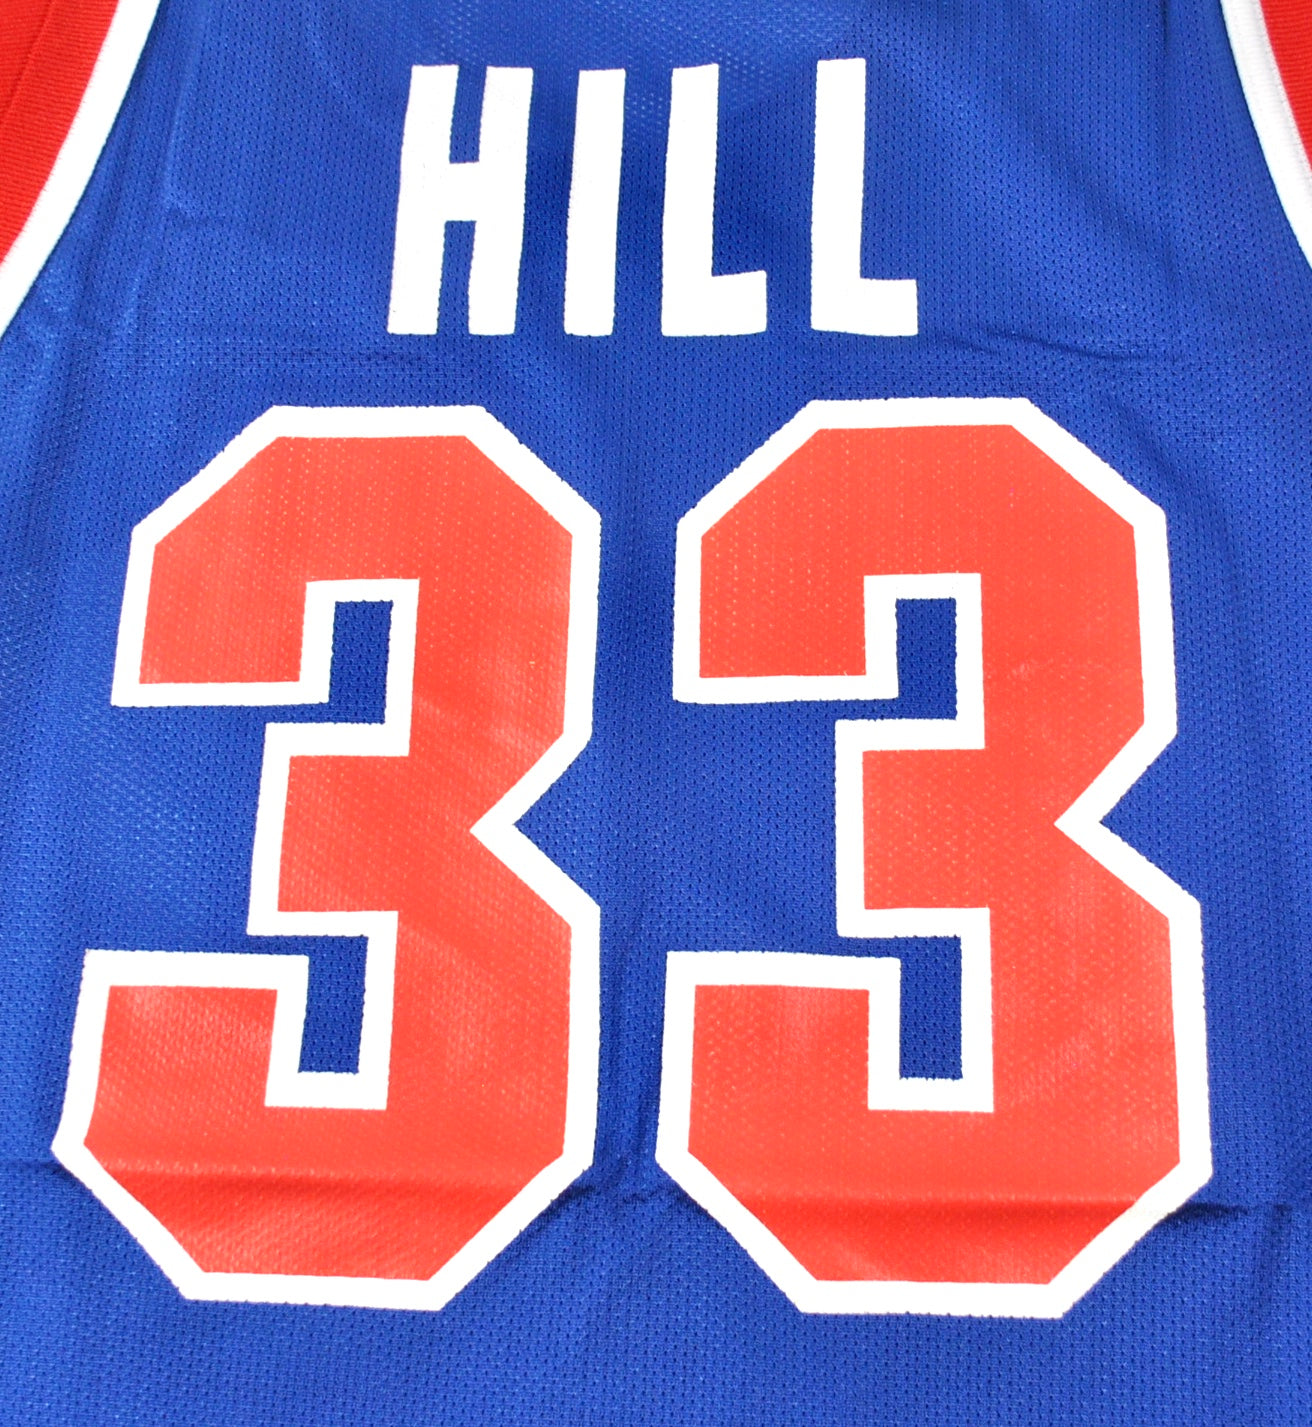 Authentic Grant Hill Detroit Pistons Champion Jersey – Fly Vintage 87